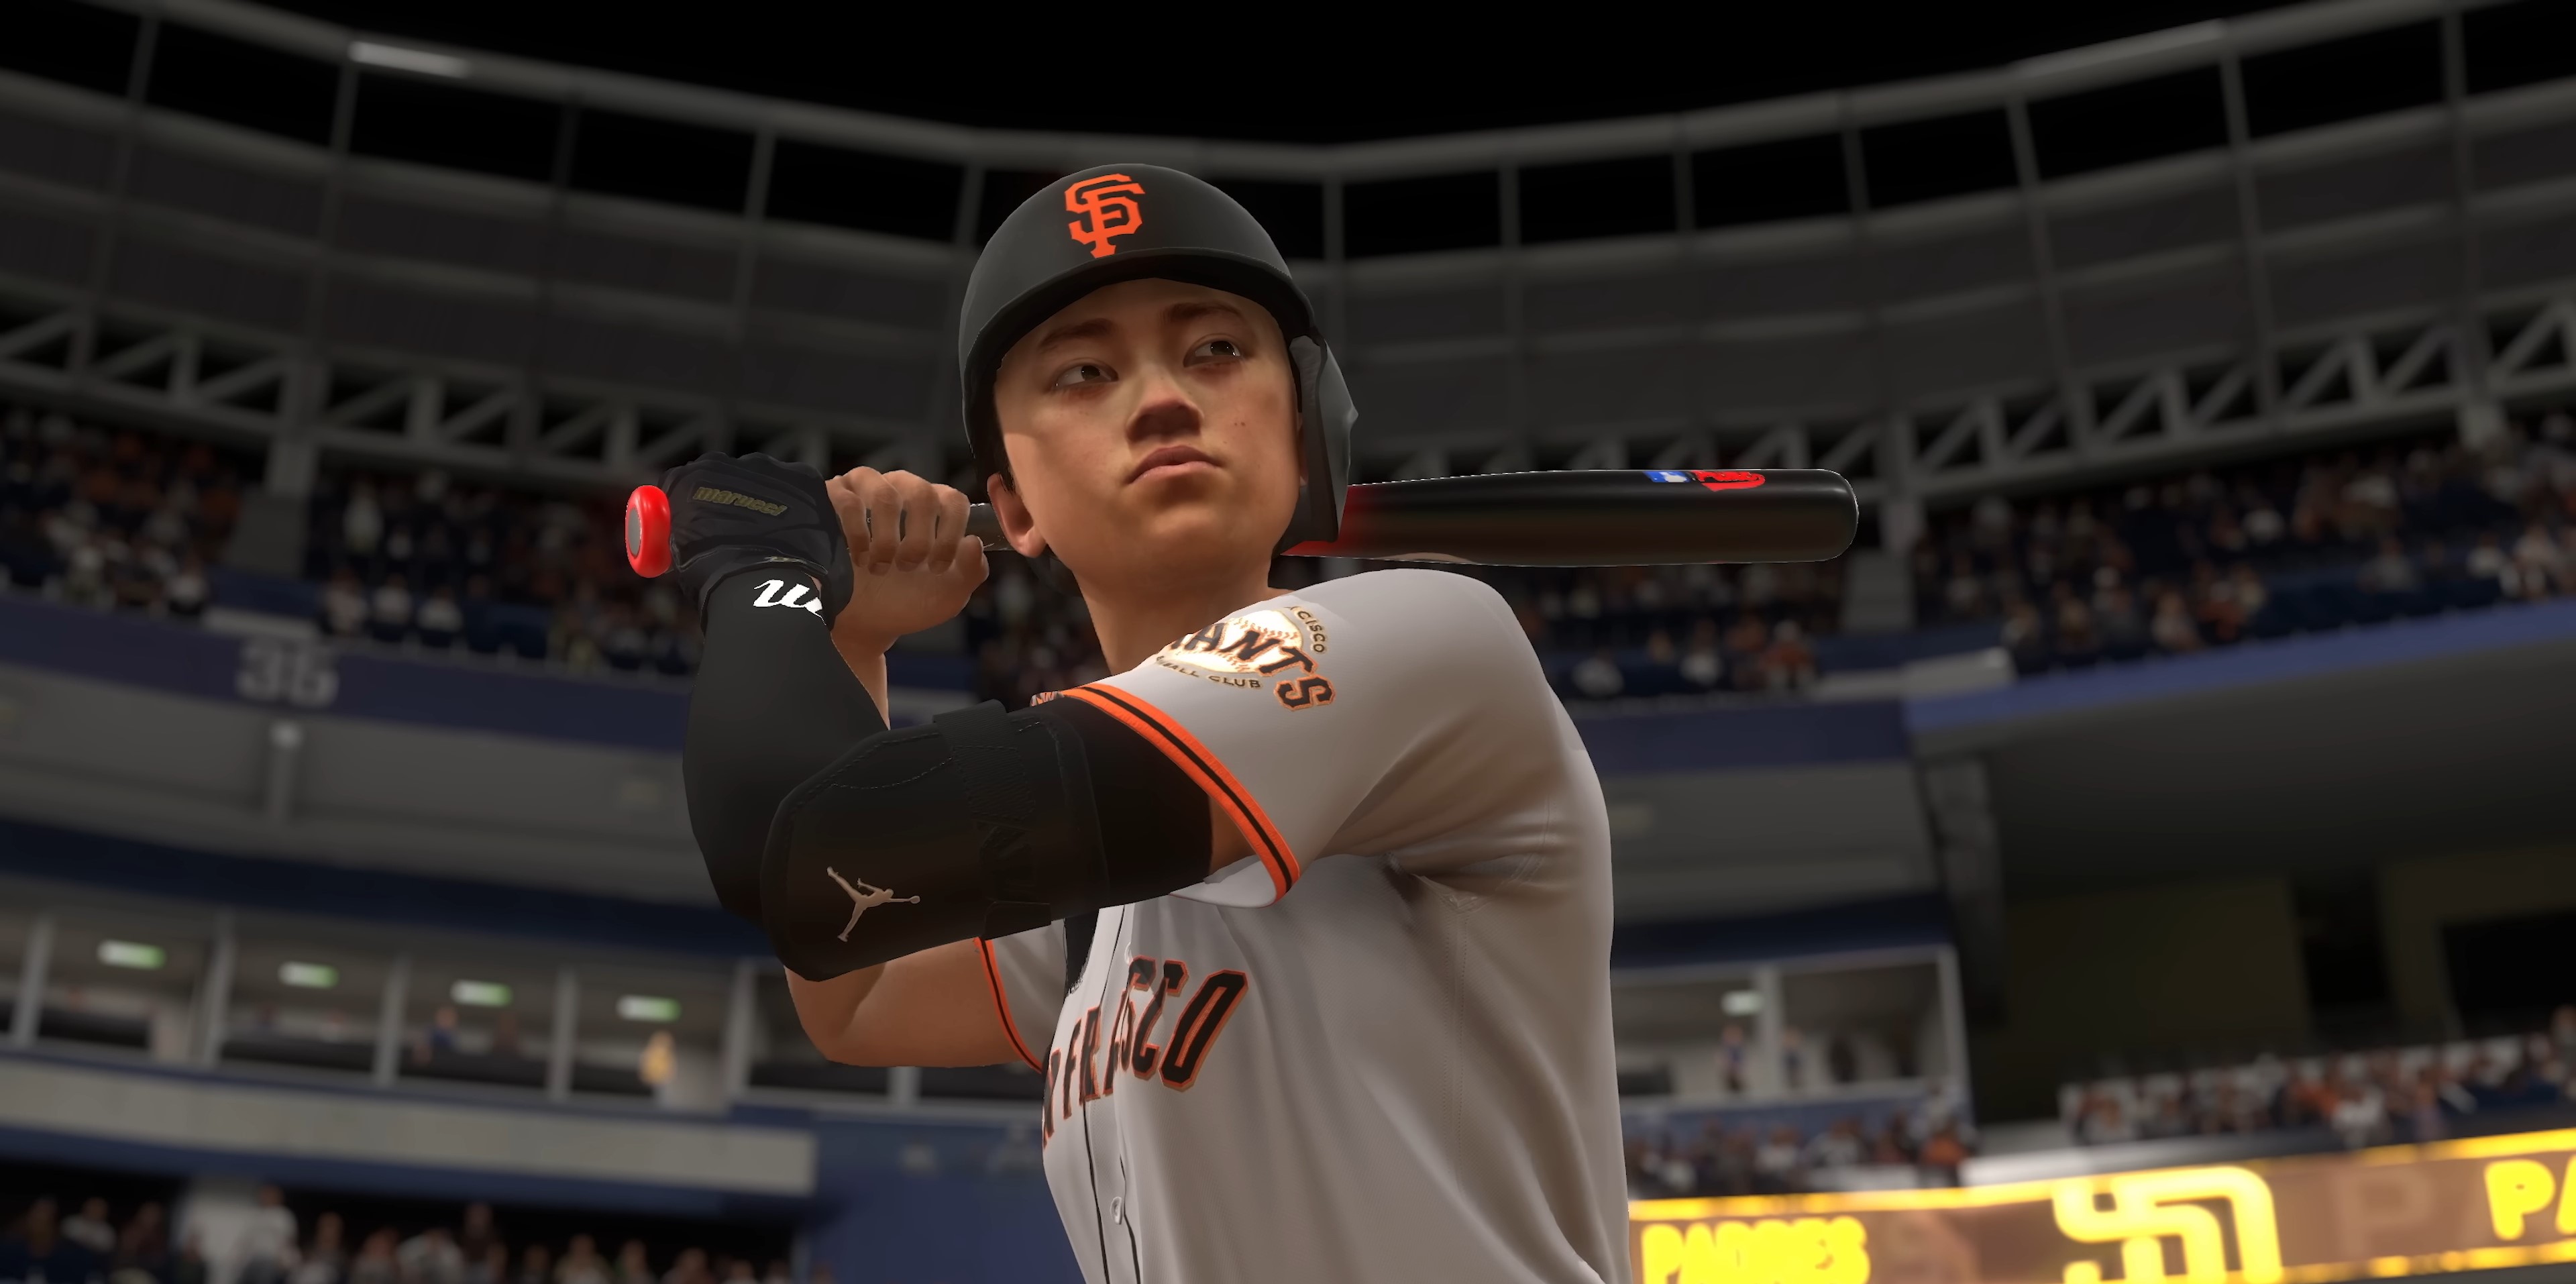 A woman plays baseball in MLB The Show 24.